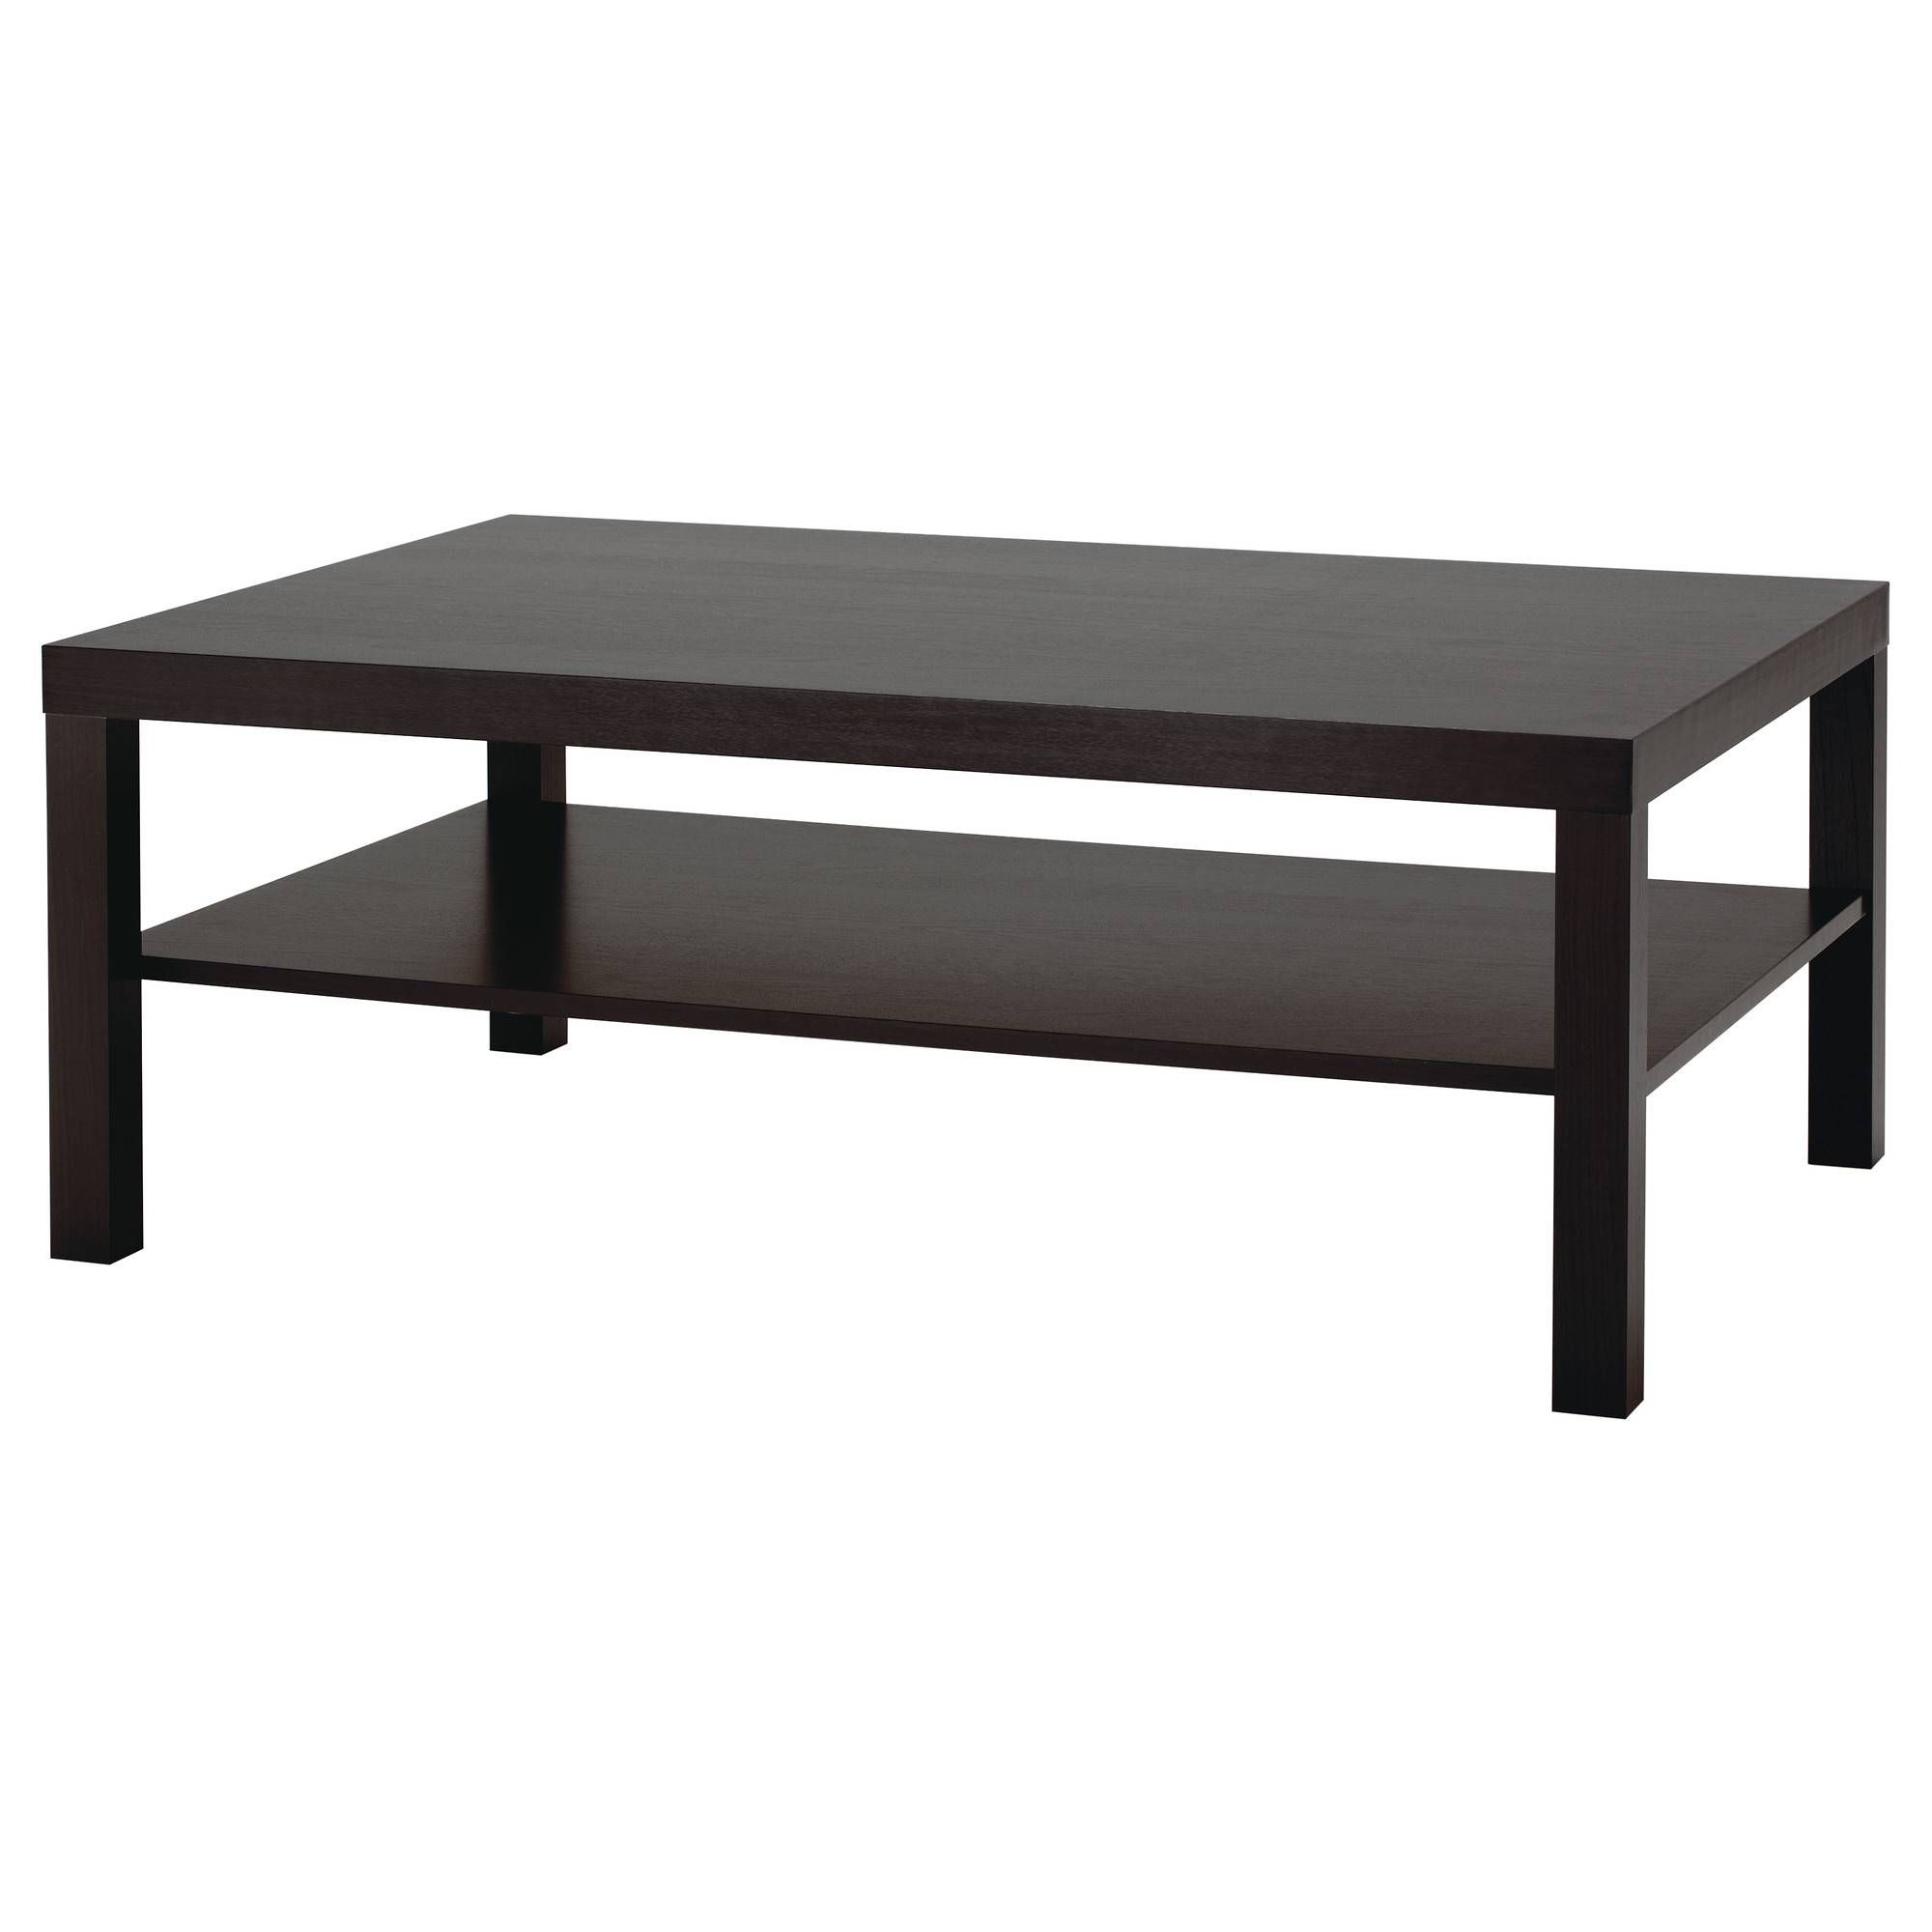 Furniture: Inexpensive Coffee Tables With Different Styles And Pertaining To Light Oak Coffee Tables With Drawers (View 12 of 30)